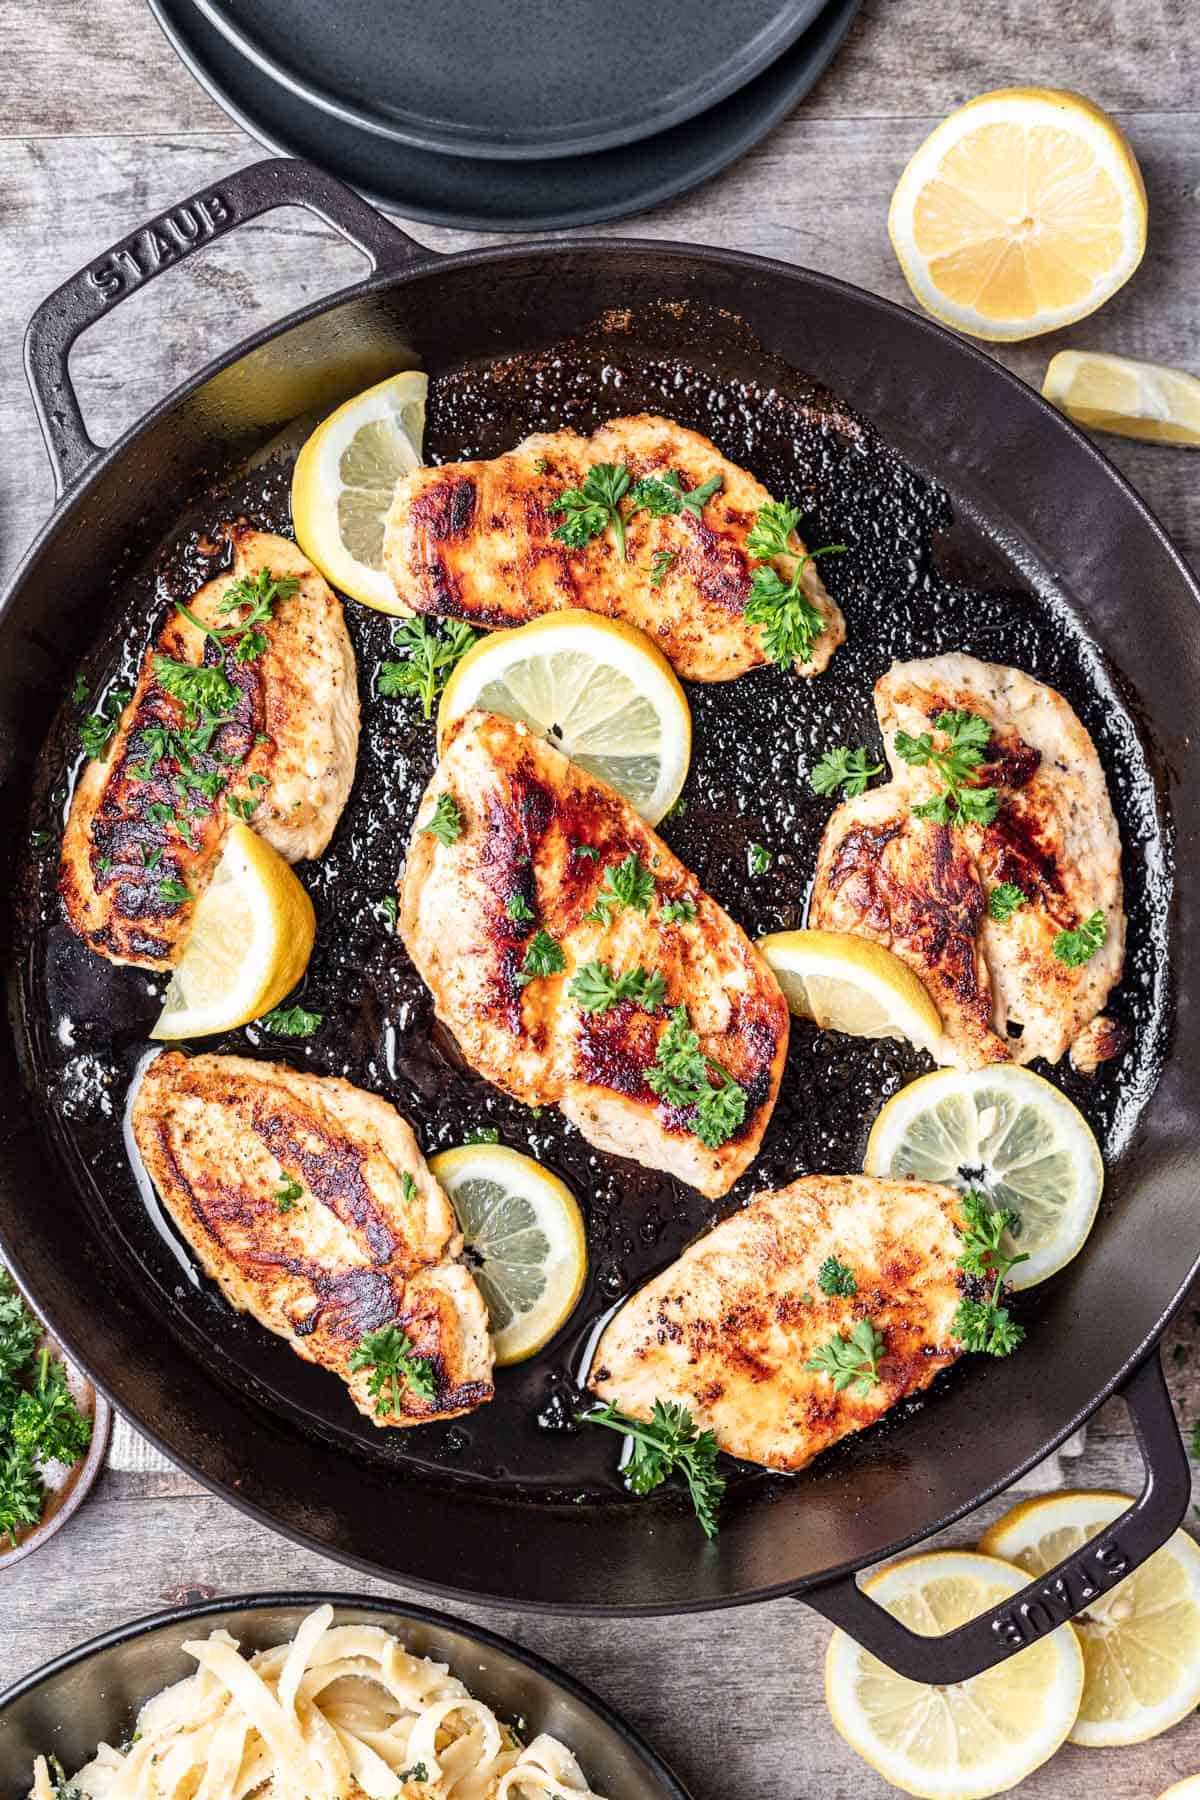 Chicken breasts cooked in a cast iron skillet, garnished with lemon slices and parsley.